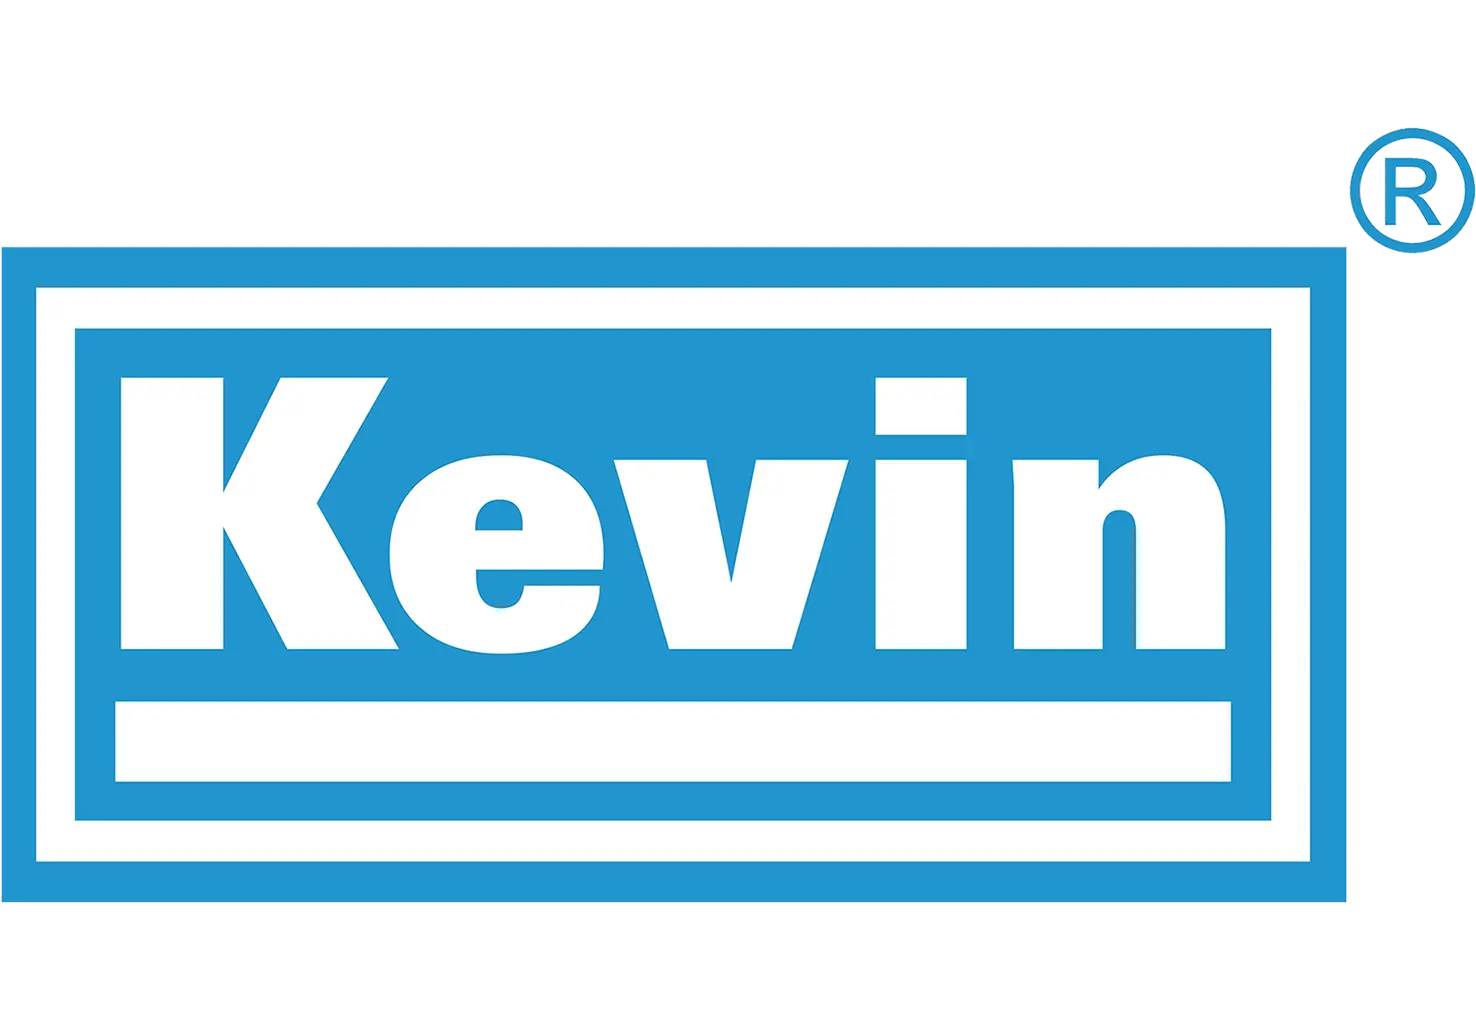 Kevin Process Technologies